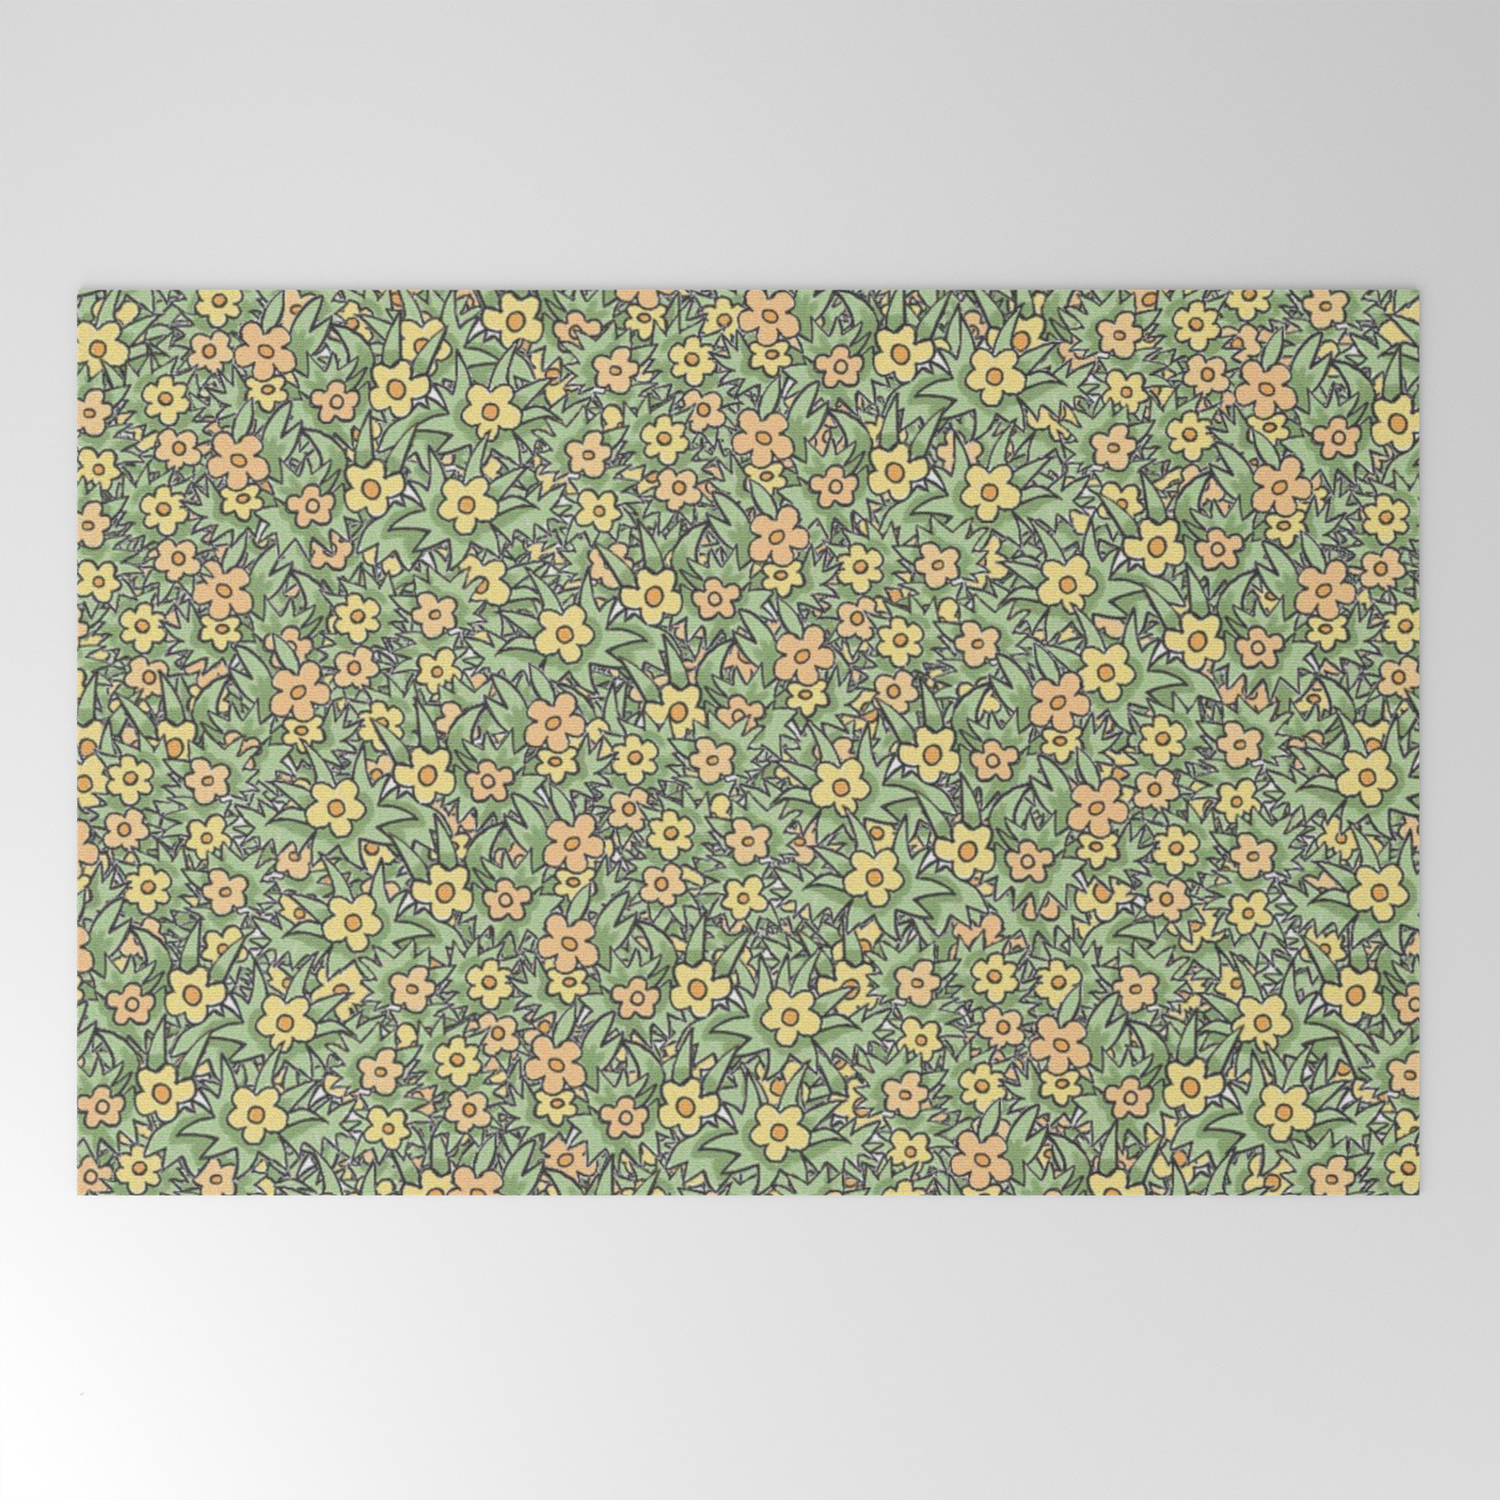 Yellow Society6 Pattern State Floral Meadow Welcome Mat 36 x 24